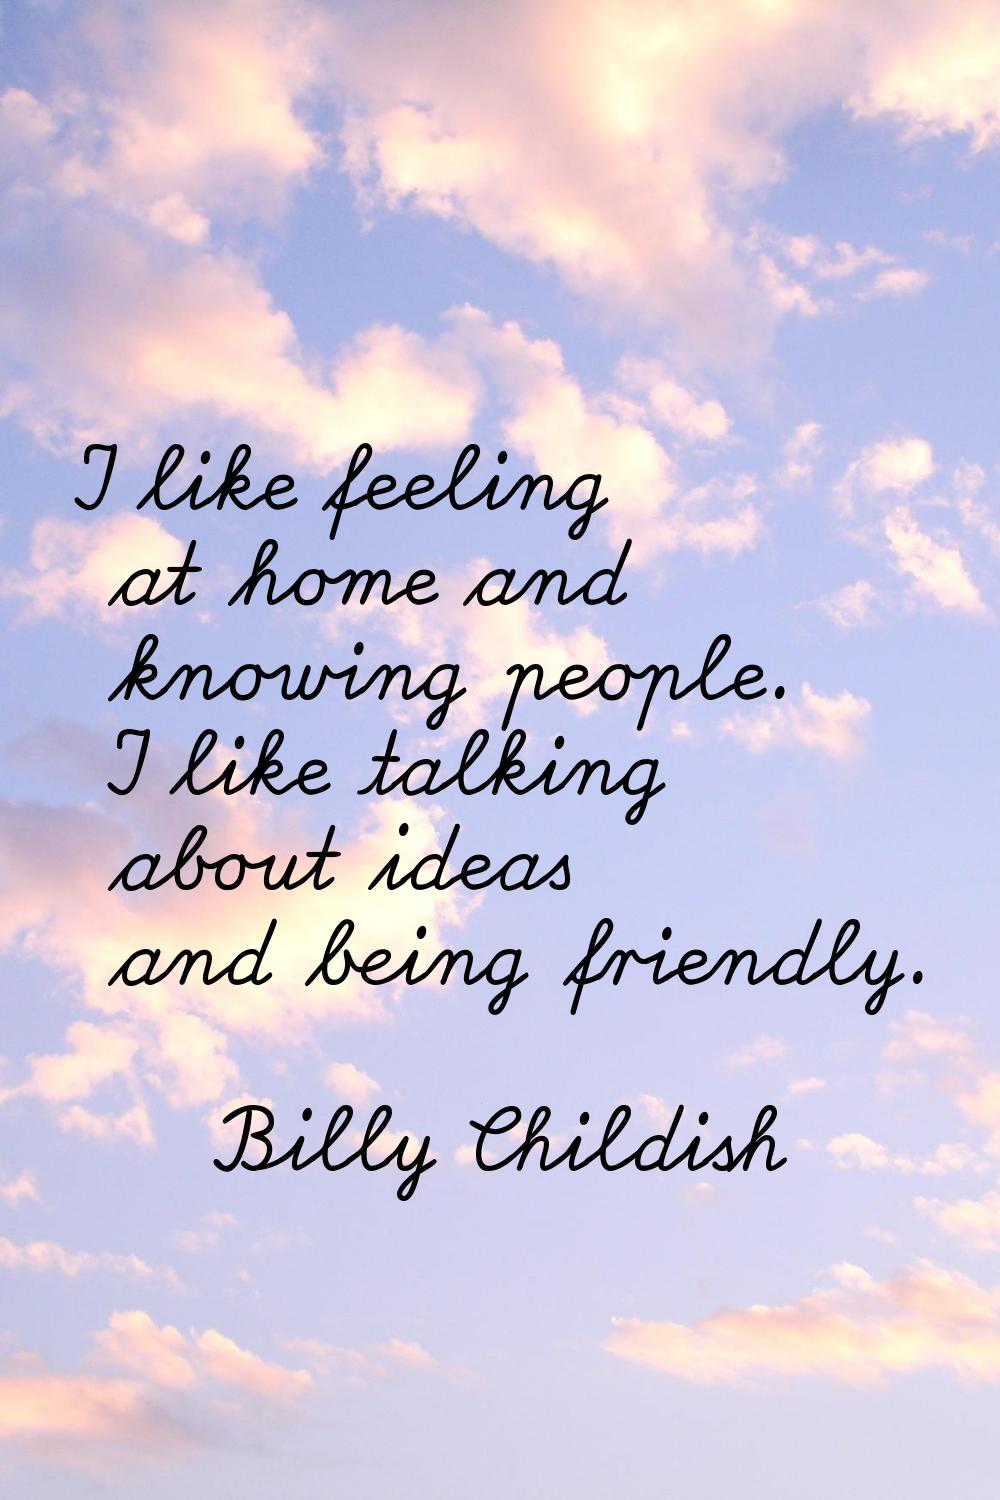 I like feeling at home and knowing people. I like talking about ideas and being friendly.